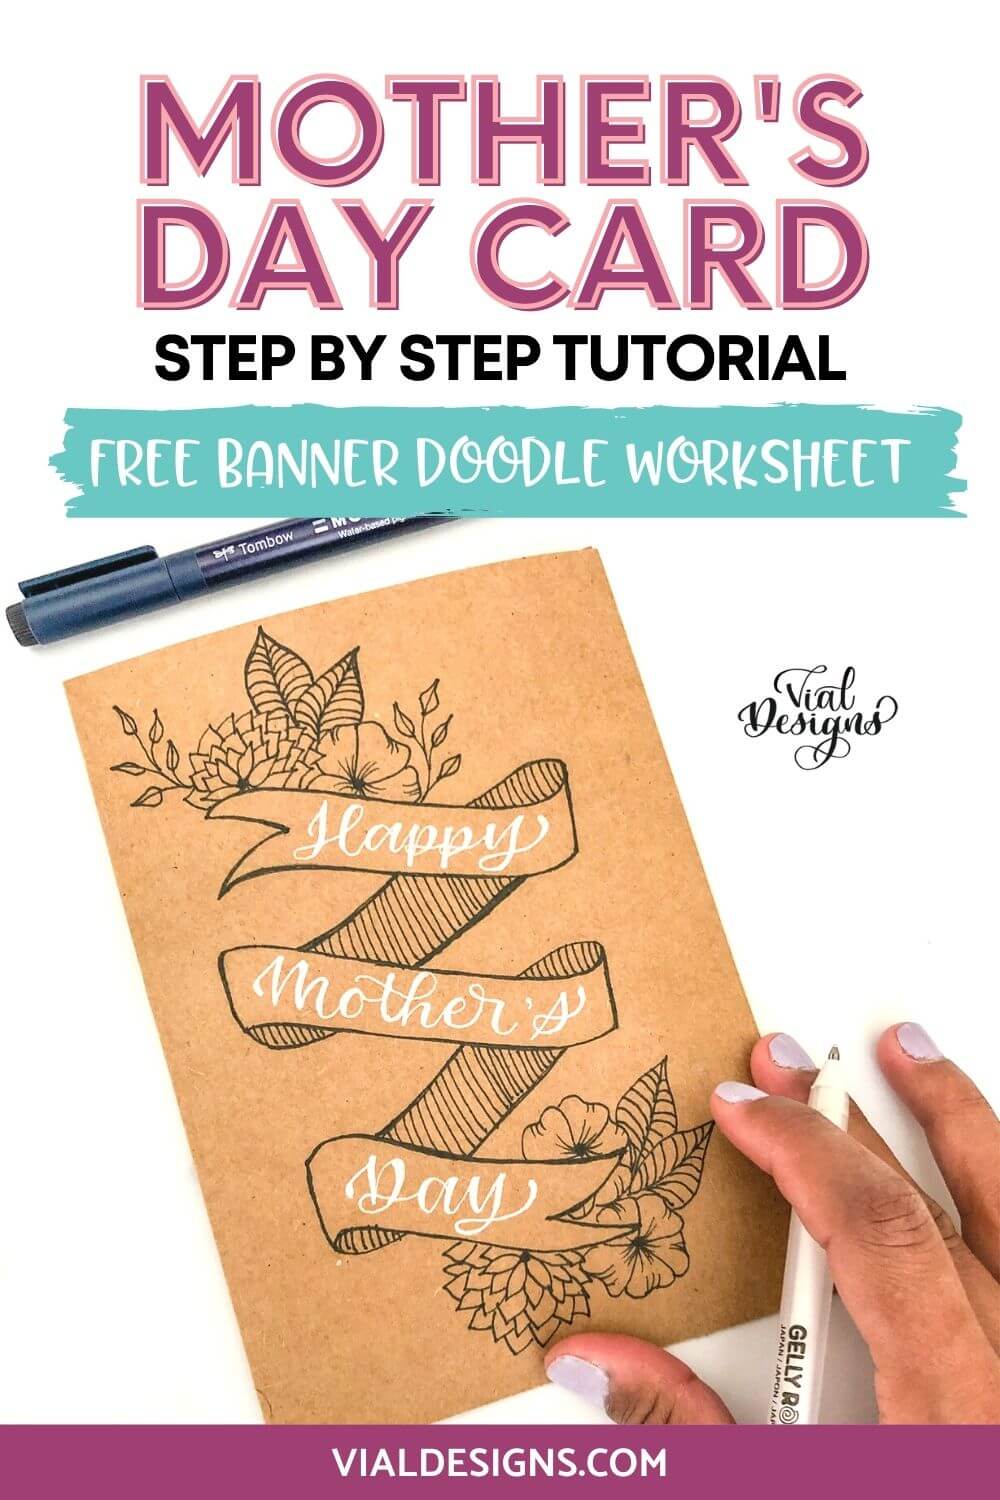 Mother's Day Card Step by Step tutorial by Vial Designs